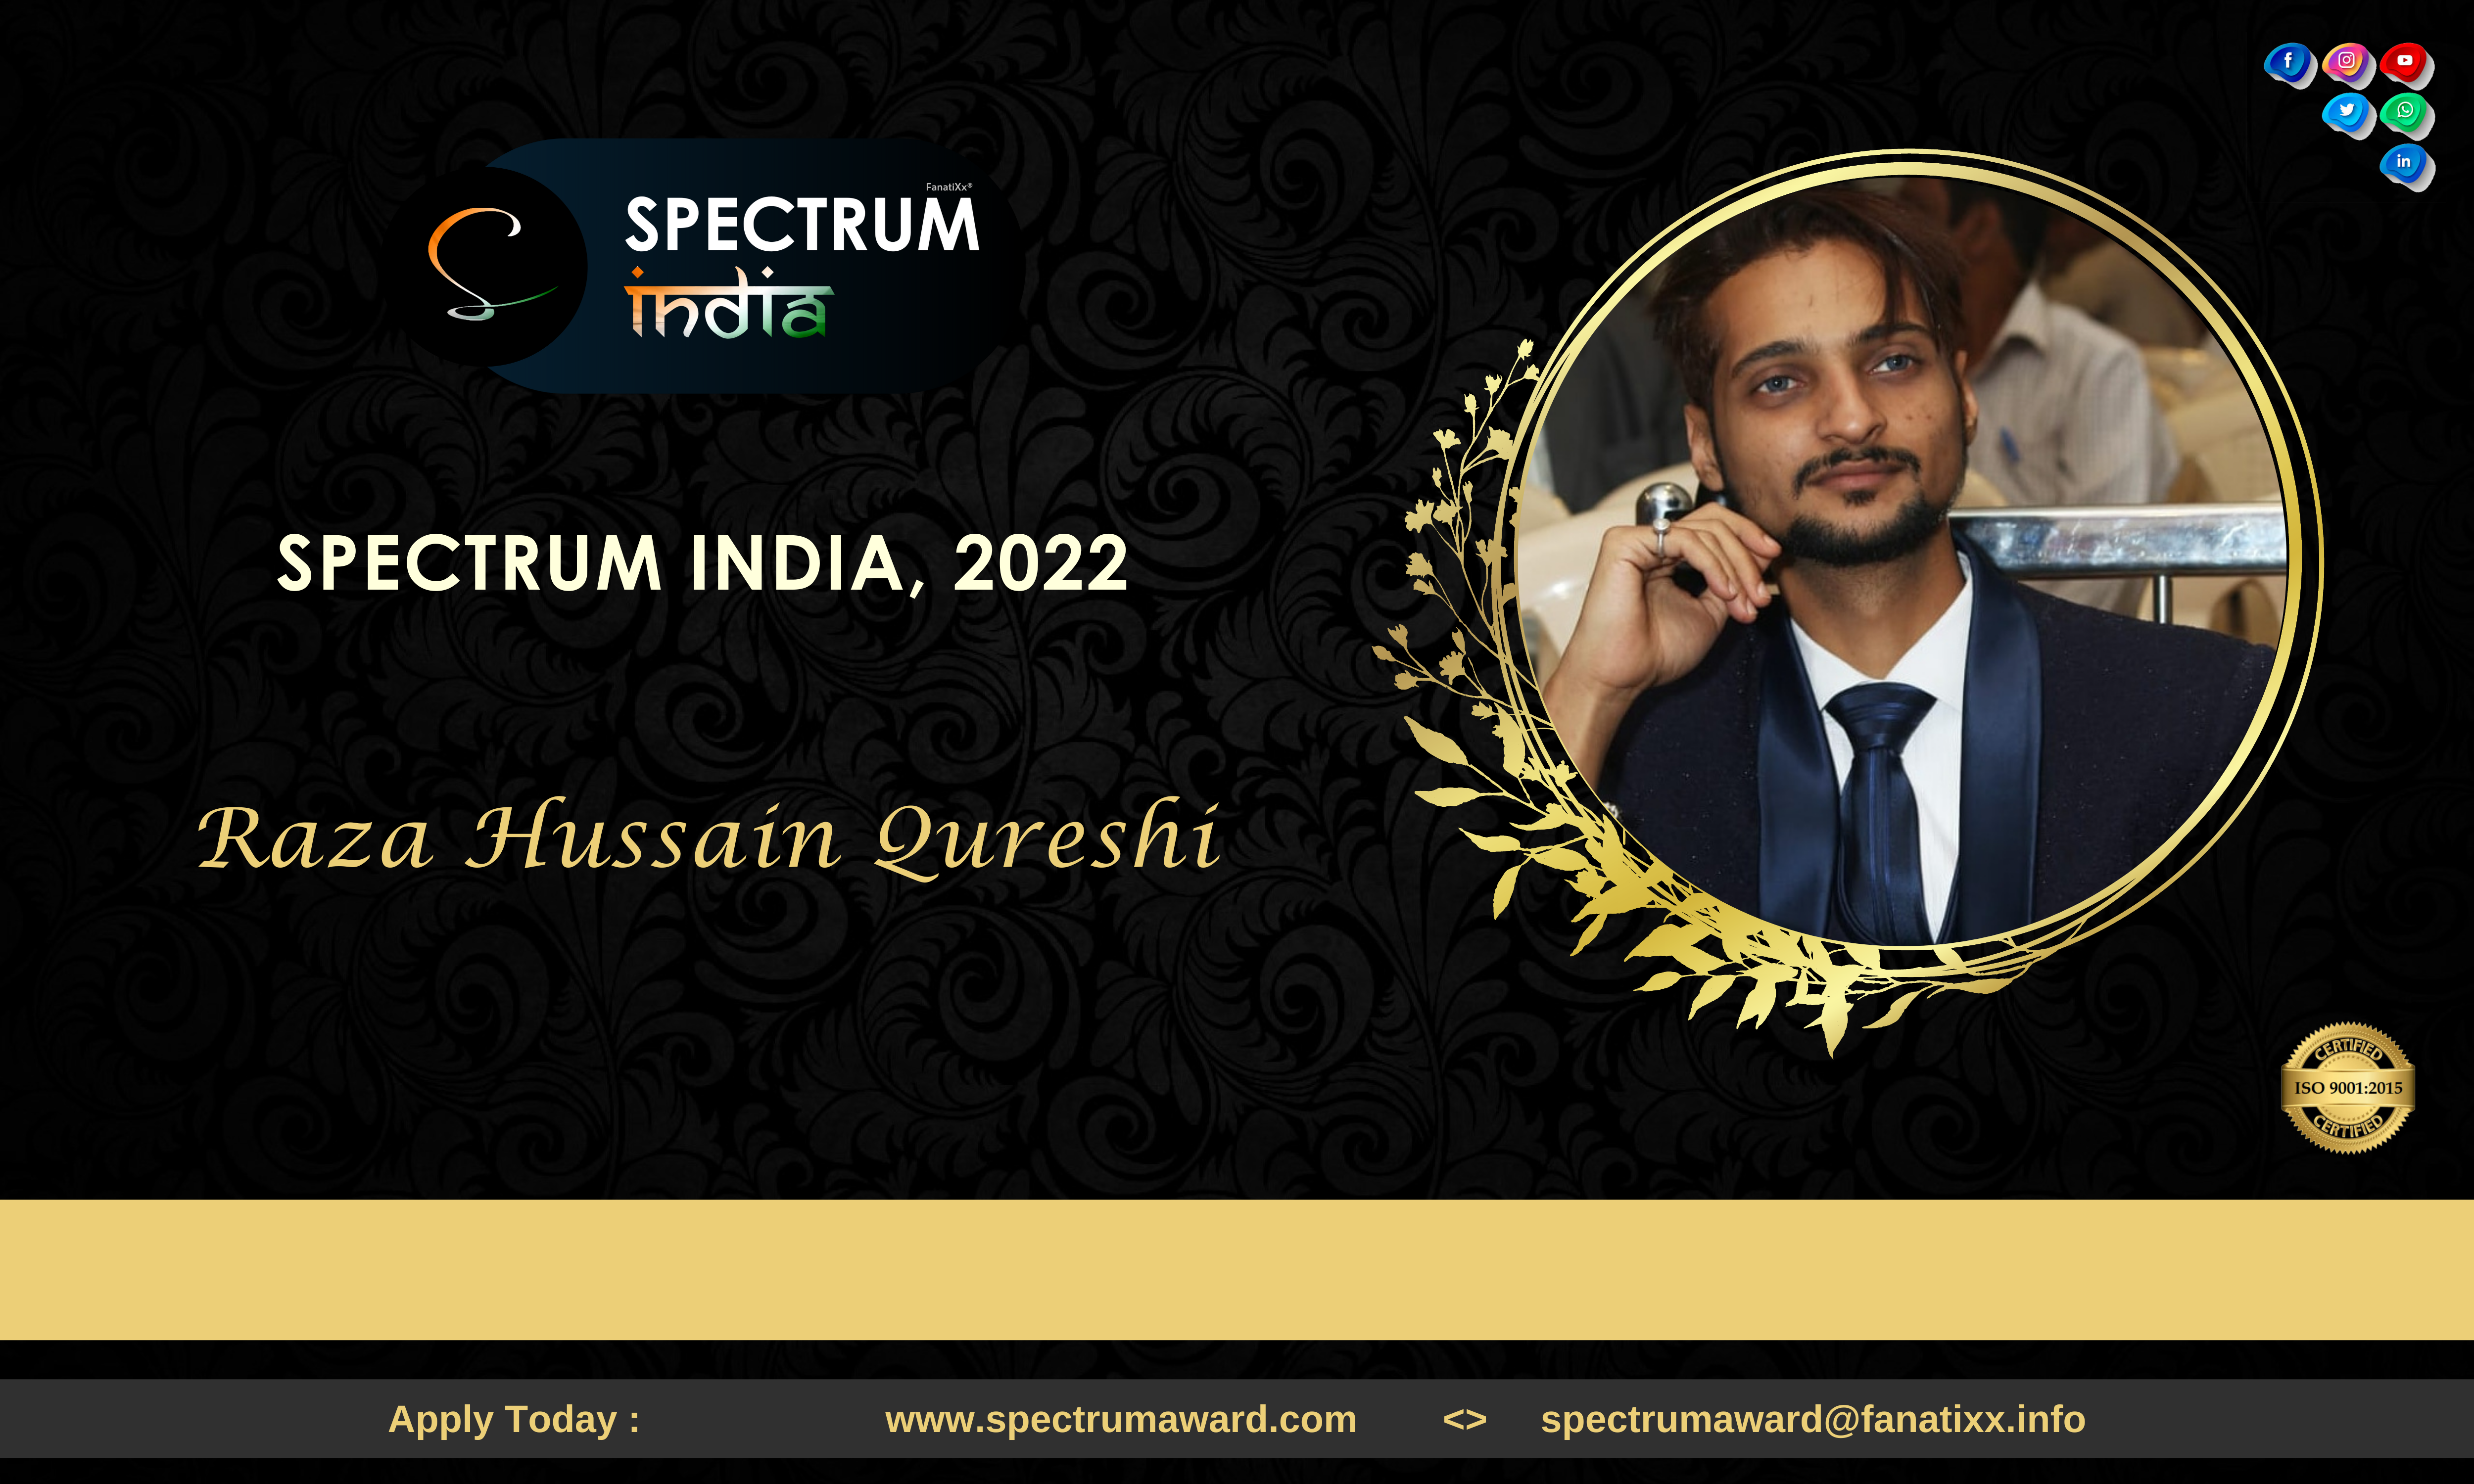 A Soulful and ambitious writer: Raza Hussain Qureshi | Spectrum India, 2022